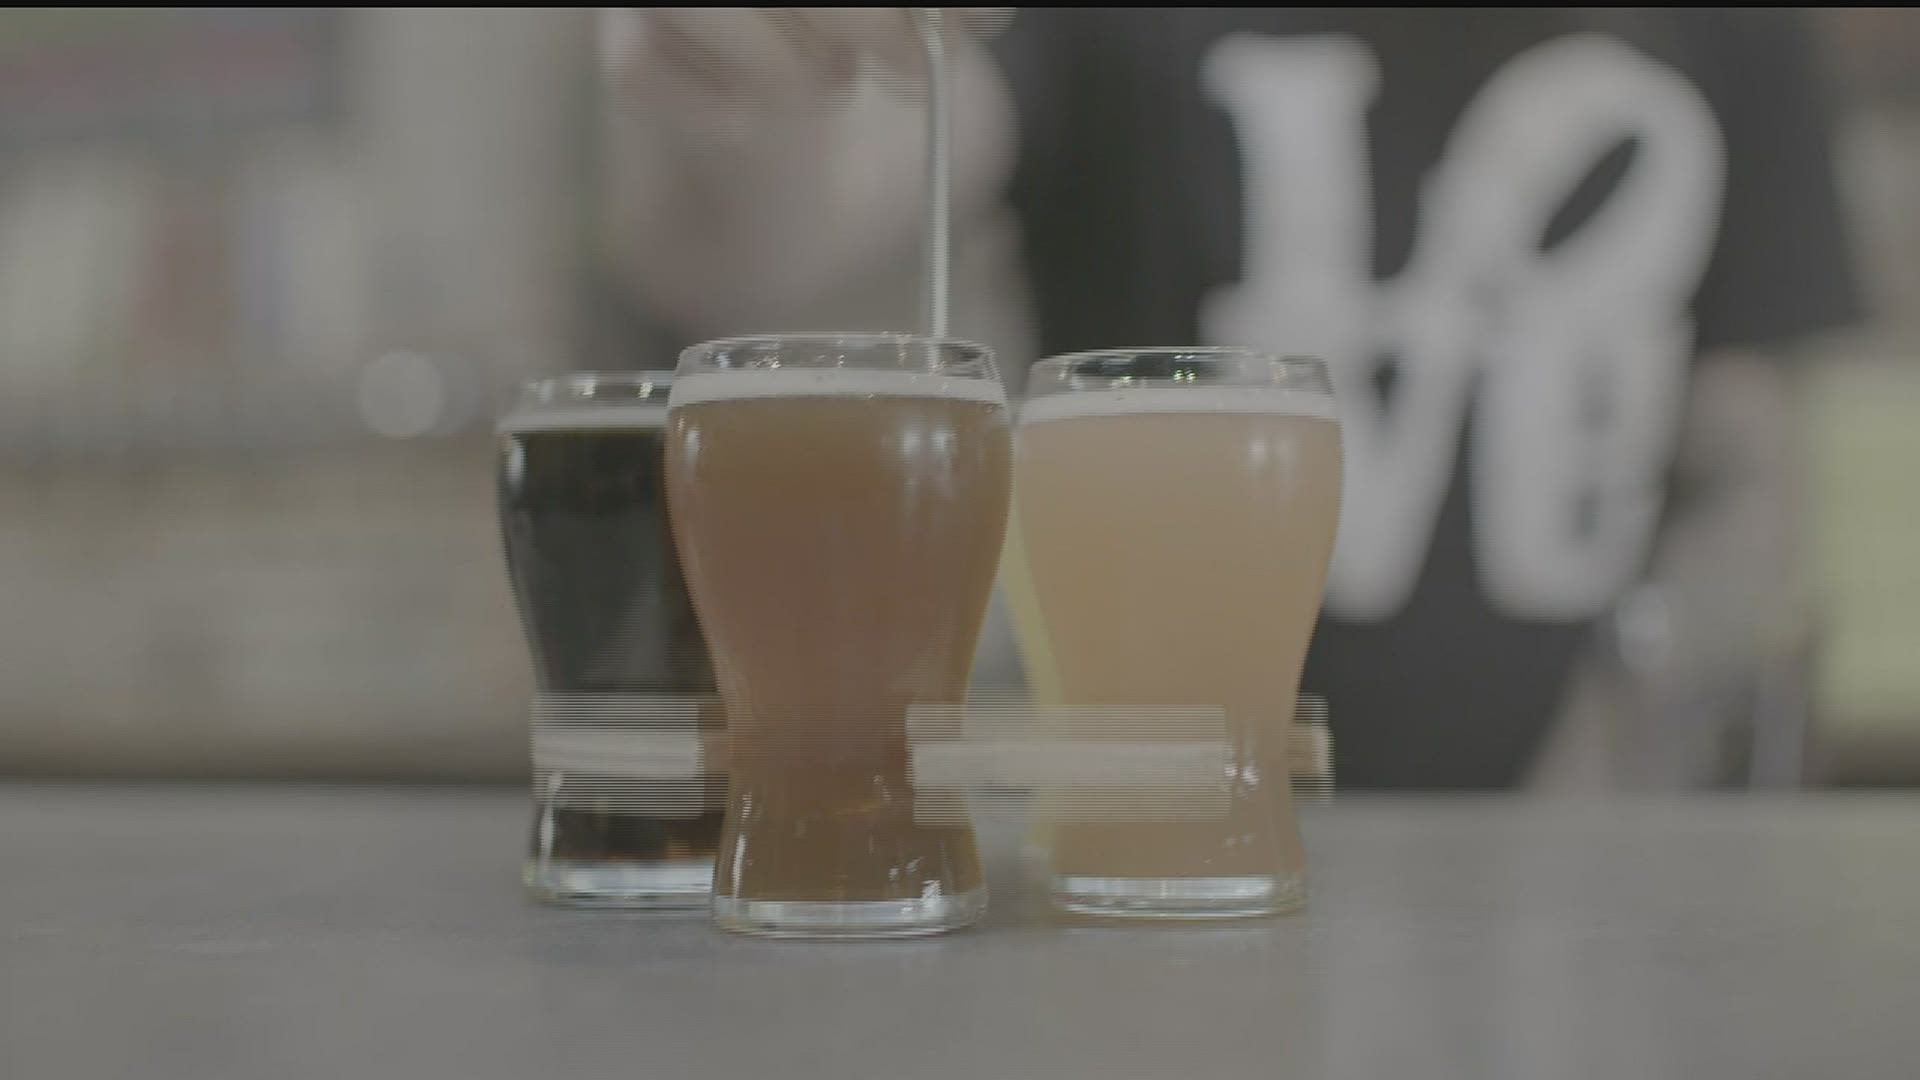 Beer lovers and NETFLIX's Tiger King fans have something to look forward to. A Philadelphia brewing company is dropping its lates brew.